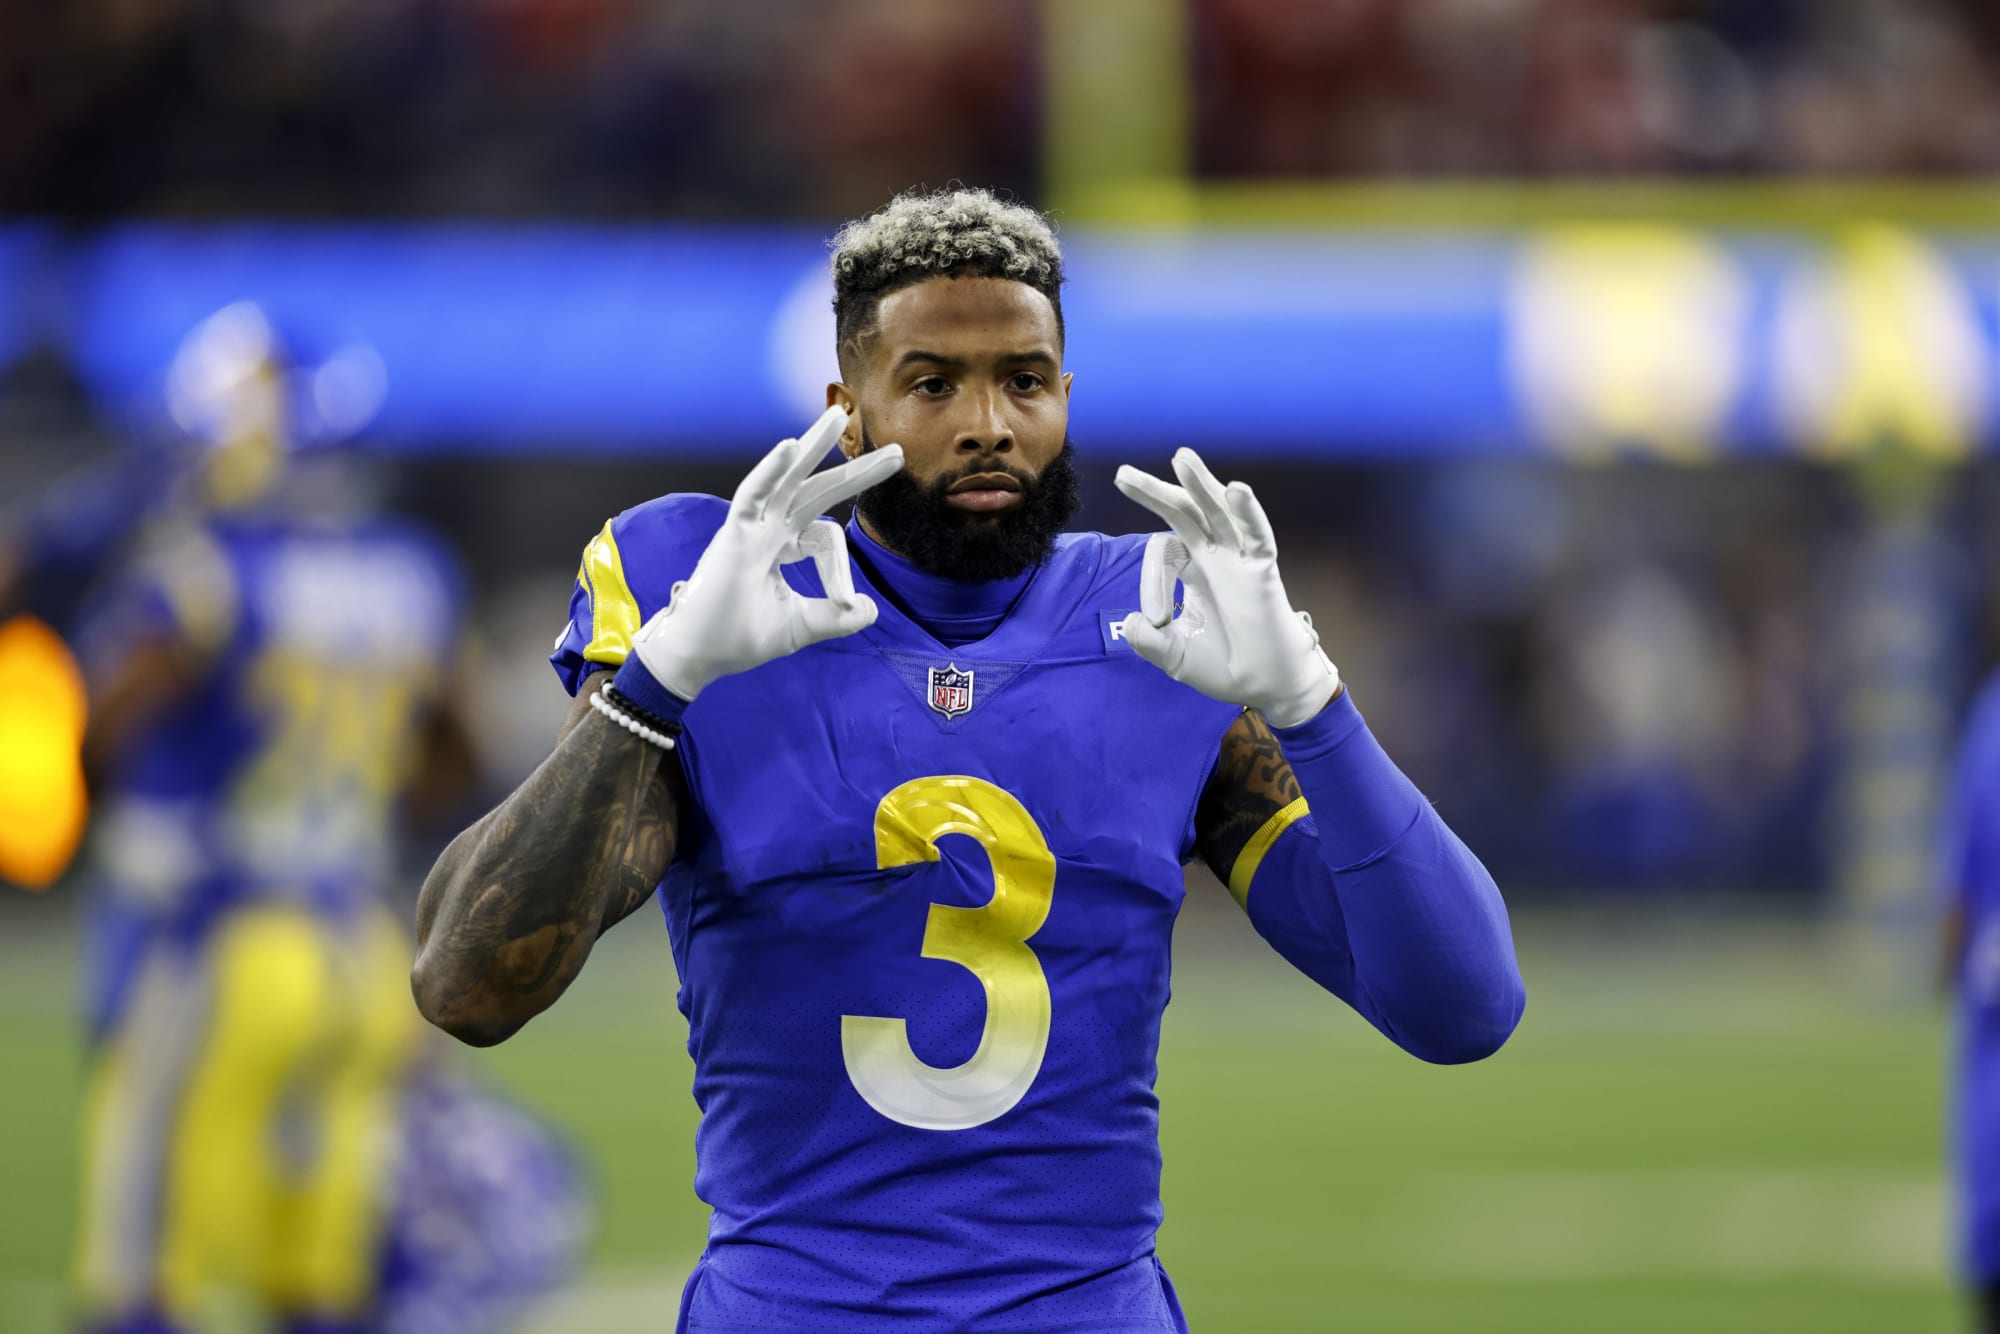 Dallas Cowboys reportedly still trying to sign Odell Beckham Jr.